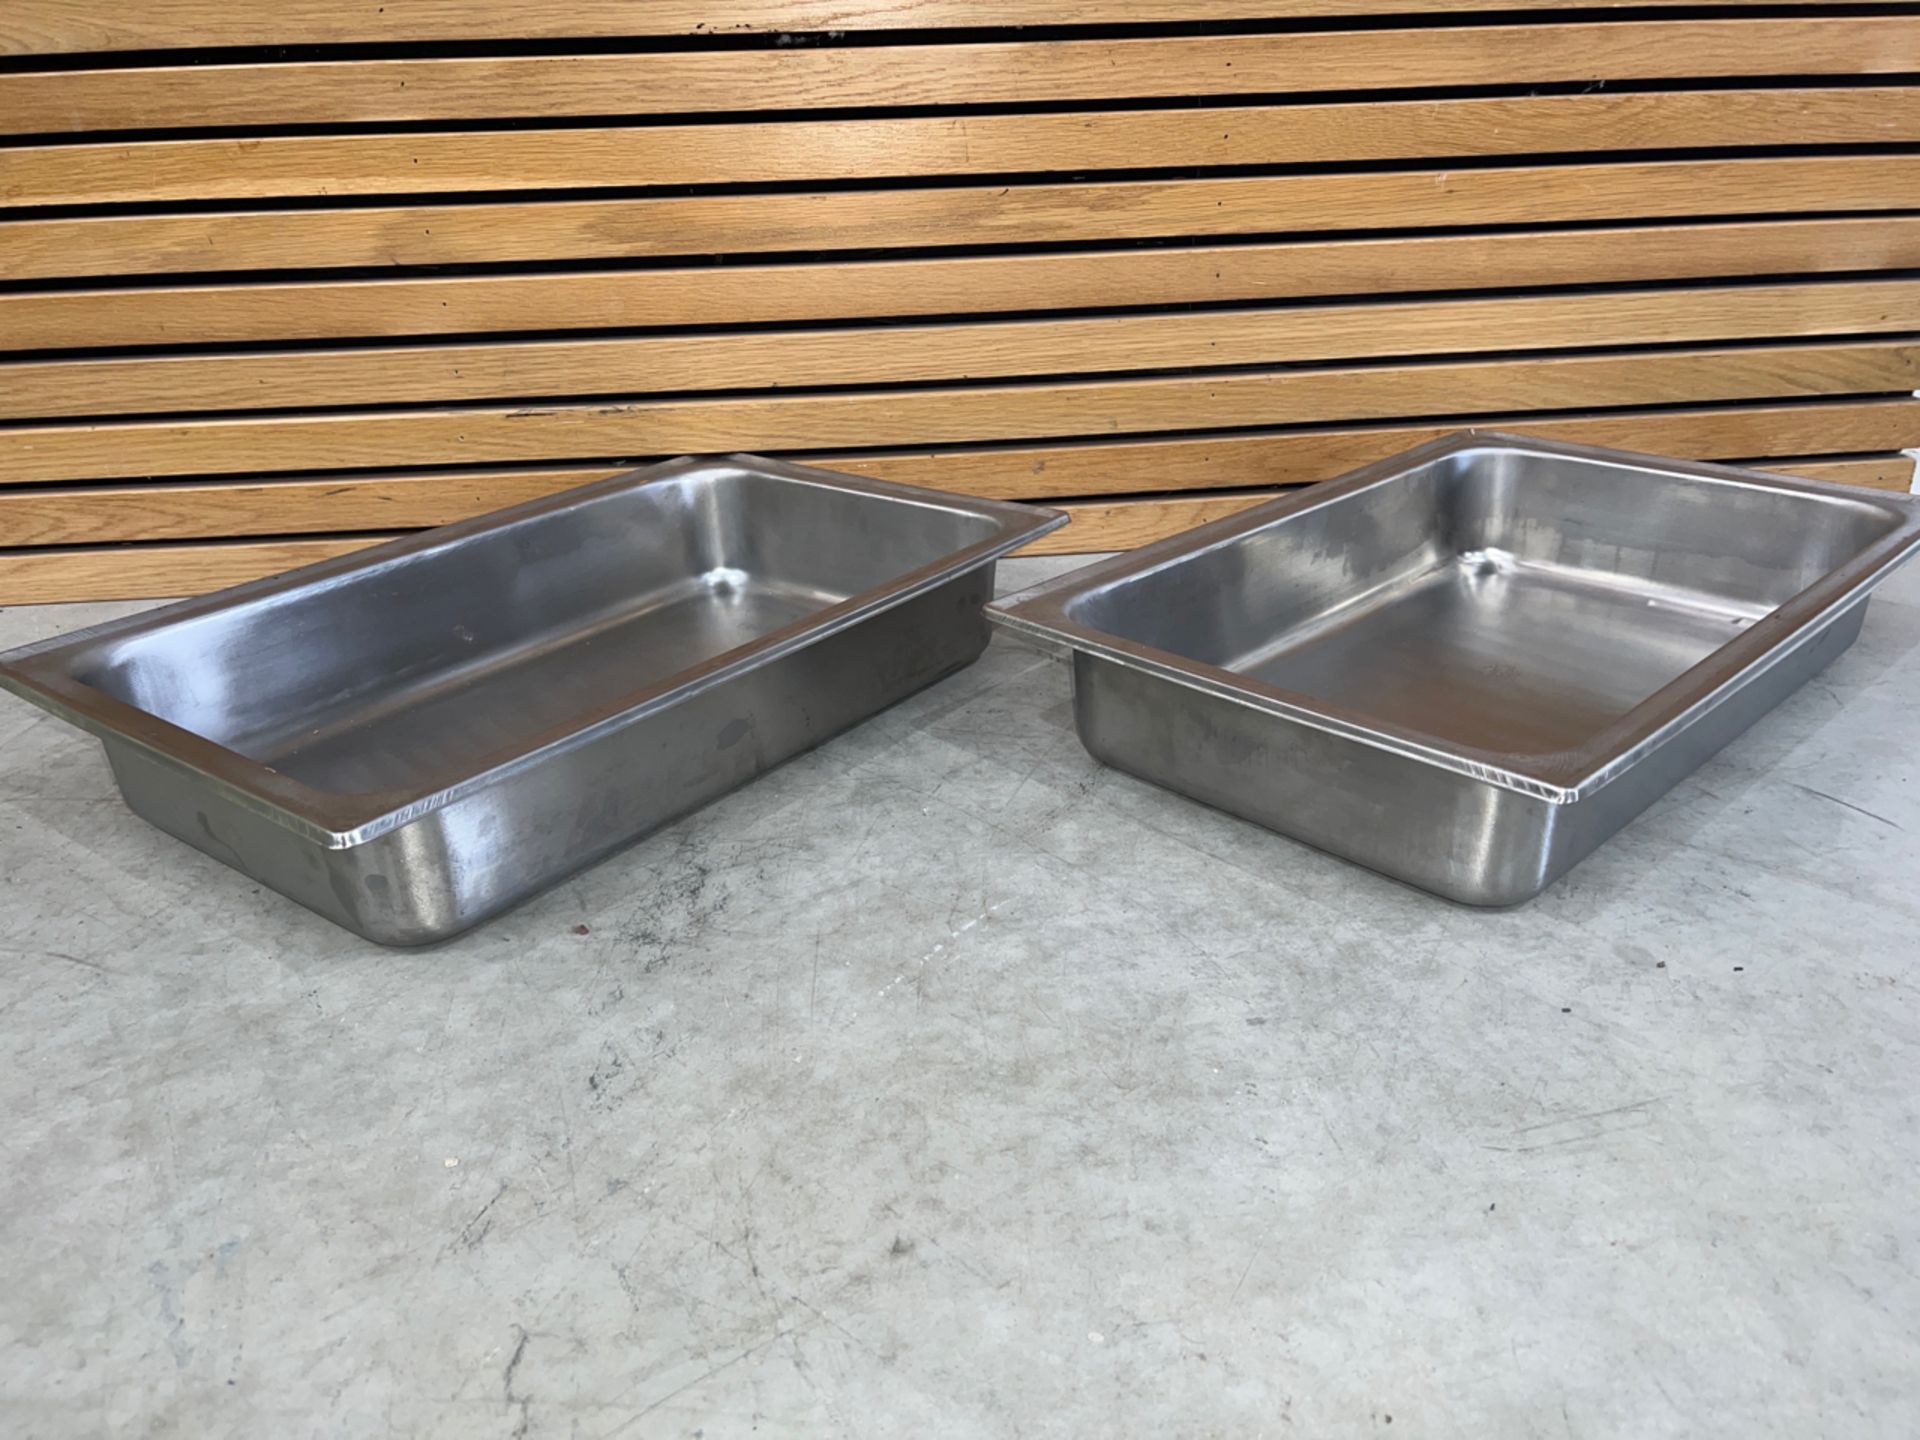 Stainless Steel Gastronorm Tray X2 - Image 3 of 3